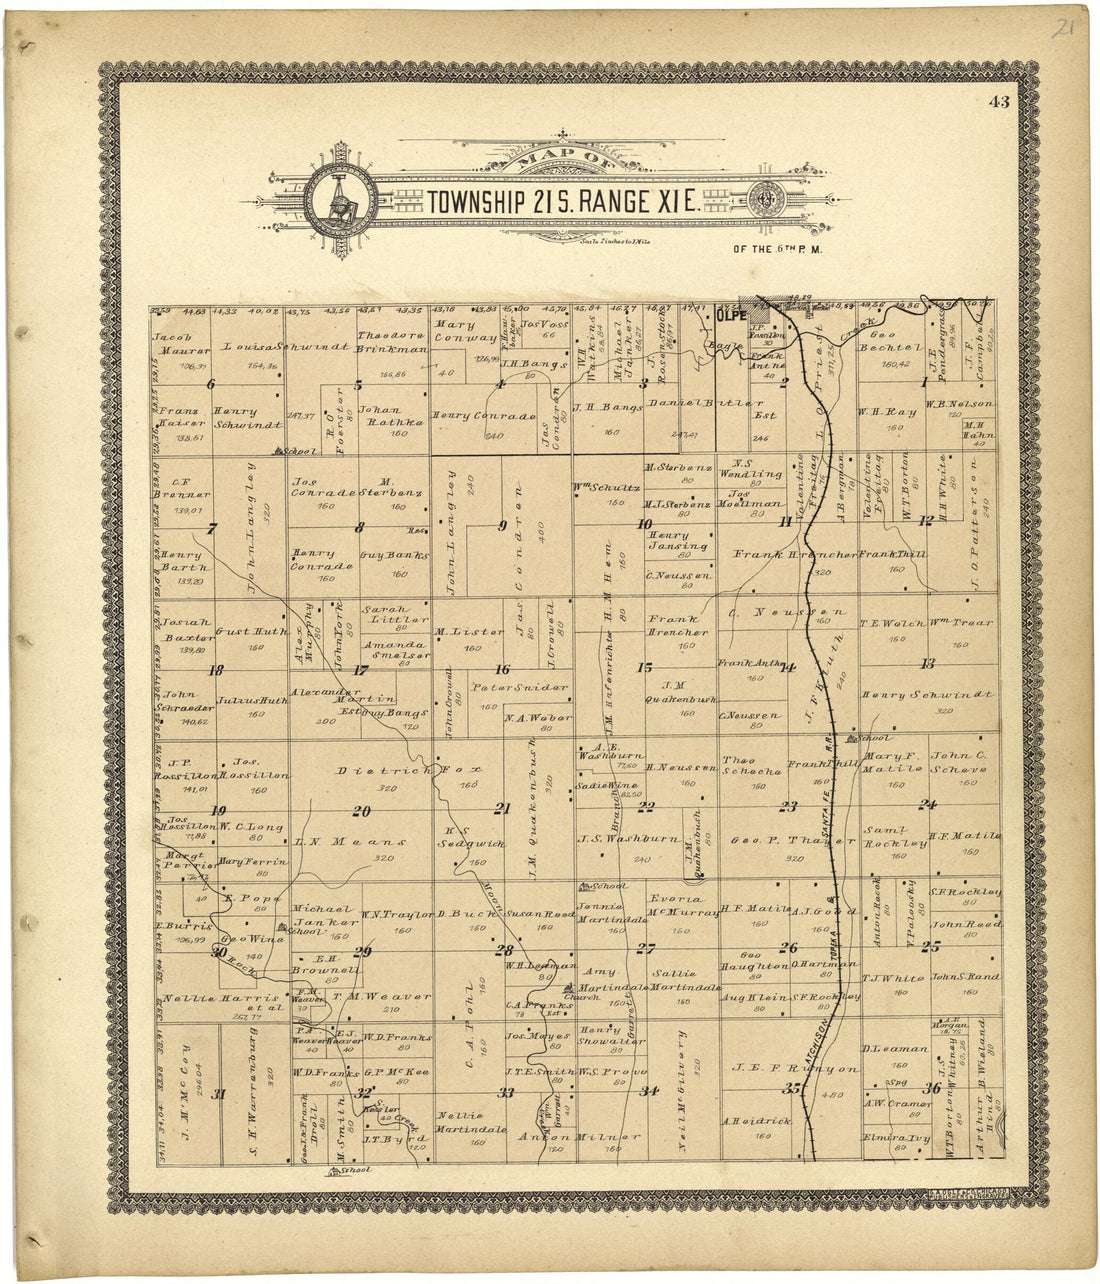 This old map of Map of Township 21 S. Range XI E. from Standard Atlas of Lyon County, Kansas from 1901 was created by  Geo. A. Ogle &amp; Co in 1901